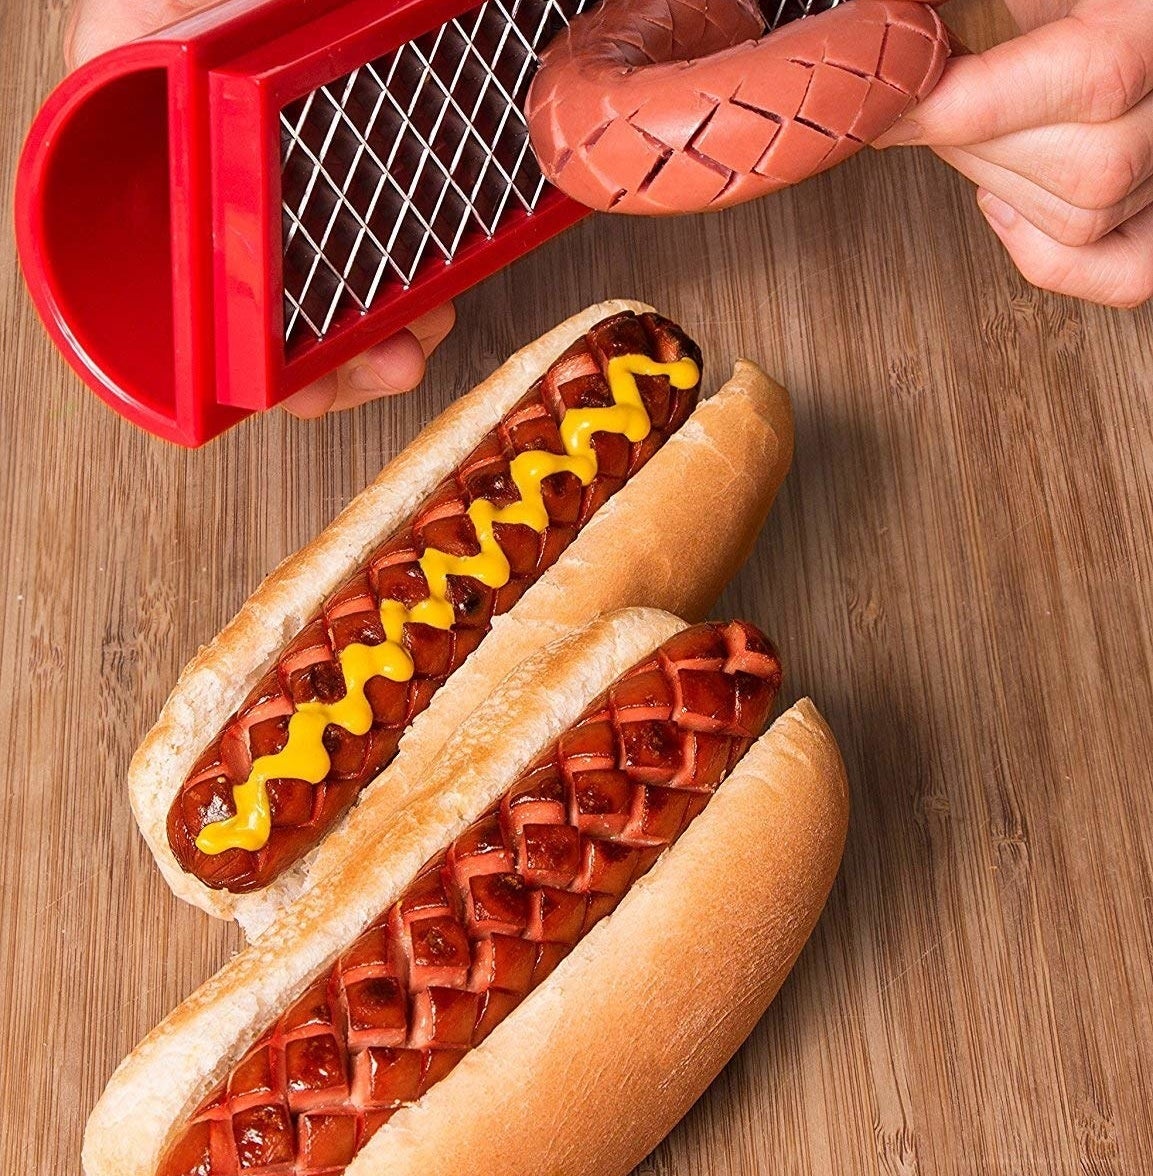 A person using the slicer on a hot dog